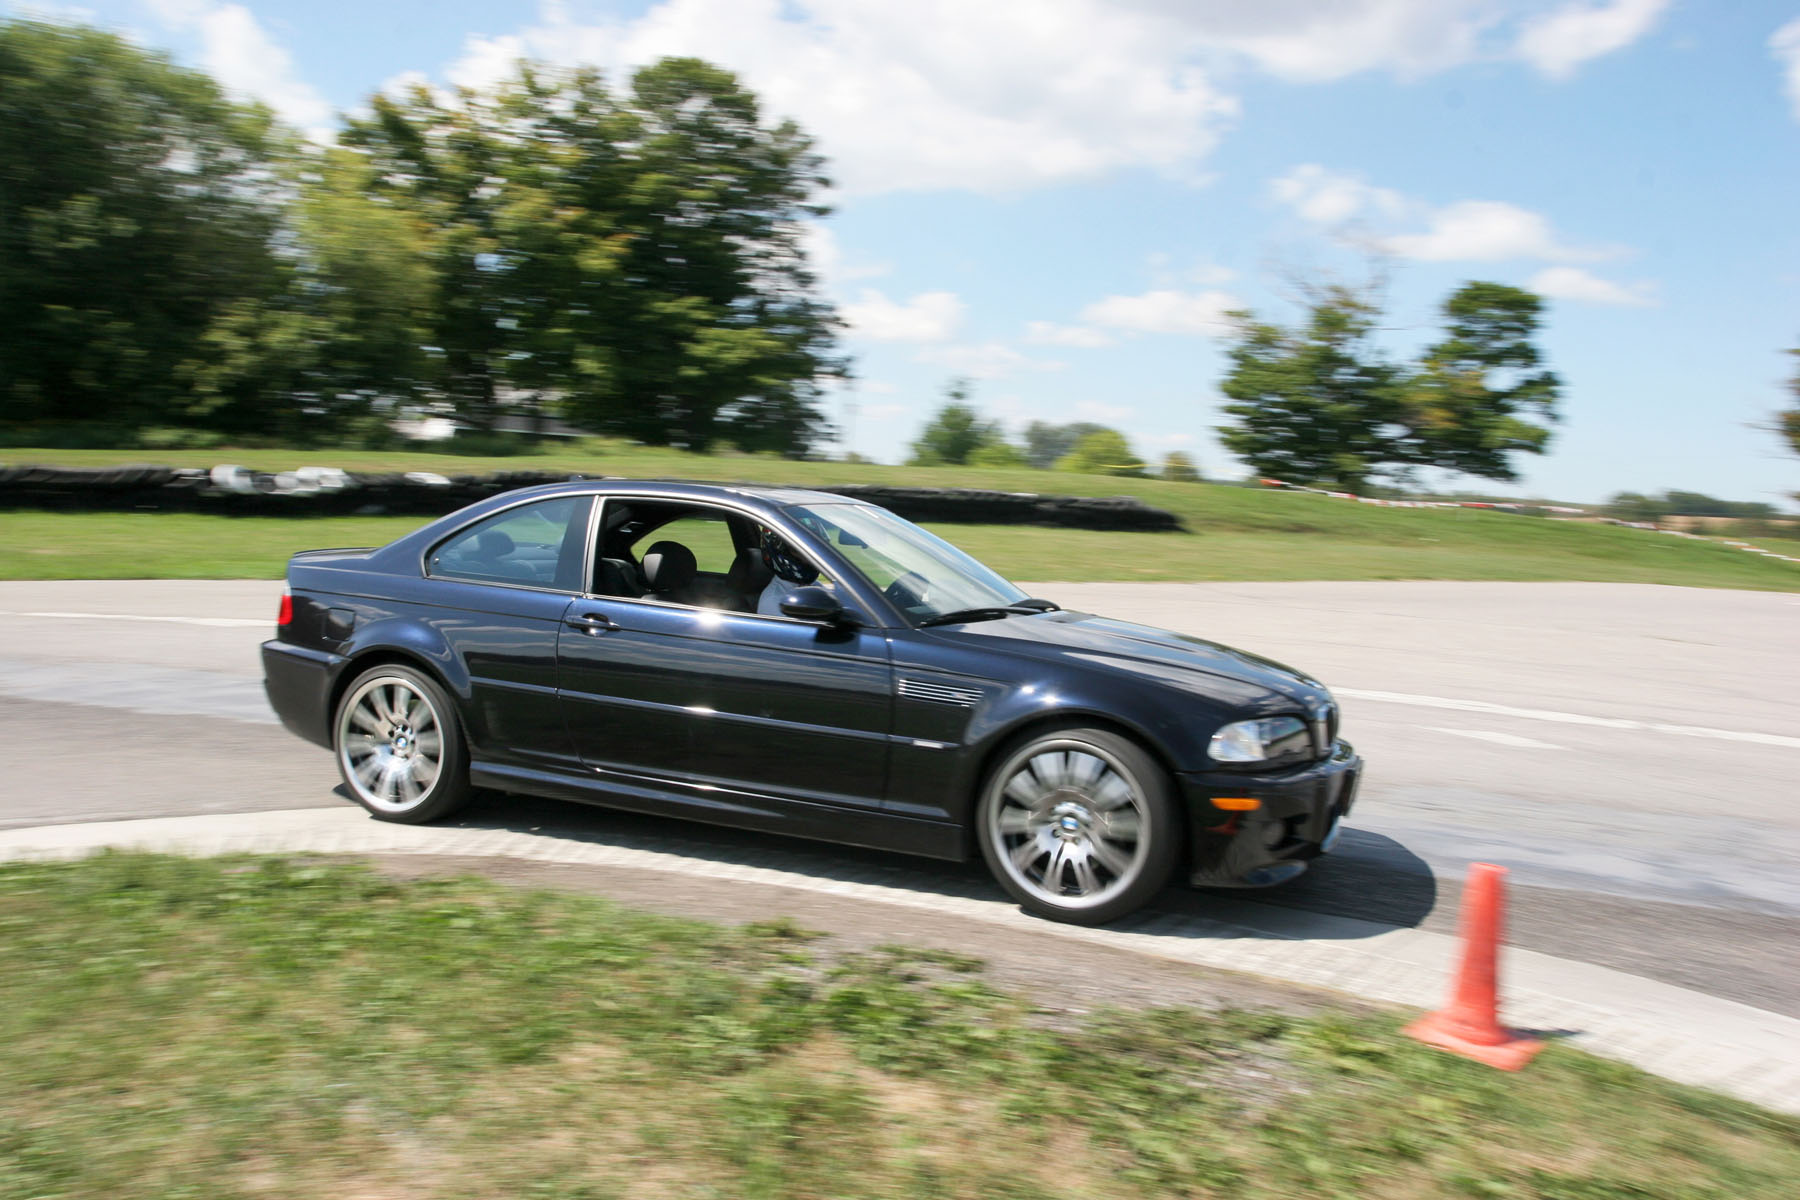 Driving on a race track or towing can push the vehicle’s brakes to their limit, thanks to the intense heat generated. For these reasons and more, brakes can sometimes get so hot that they don’t work properly. Largely, that’s because the heat begins affecting the viscosity of the fluid responsible for transmitting your pedal input to the brake calipers. From the driver’s seat, overheated brakes are evidenced by a spongy pedal, longer stopping distances, and more pedal travel until things cool off. <br><br>Fading Brake Assist can help, by providing more consistent pedal feel and stopping power when things get hot. In effect, the system monitors the correlation between the brake pedal application and vehicle deceleration, ramping up stopping power automatically via increased brake pressure in situations where the brakes are fading.